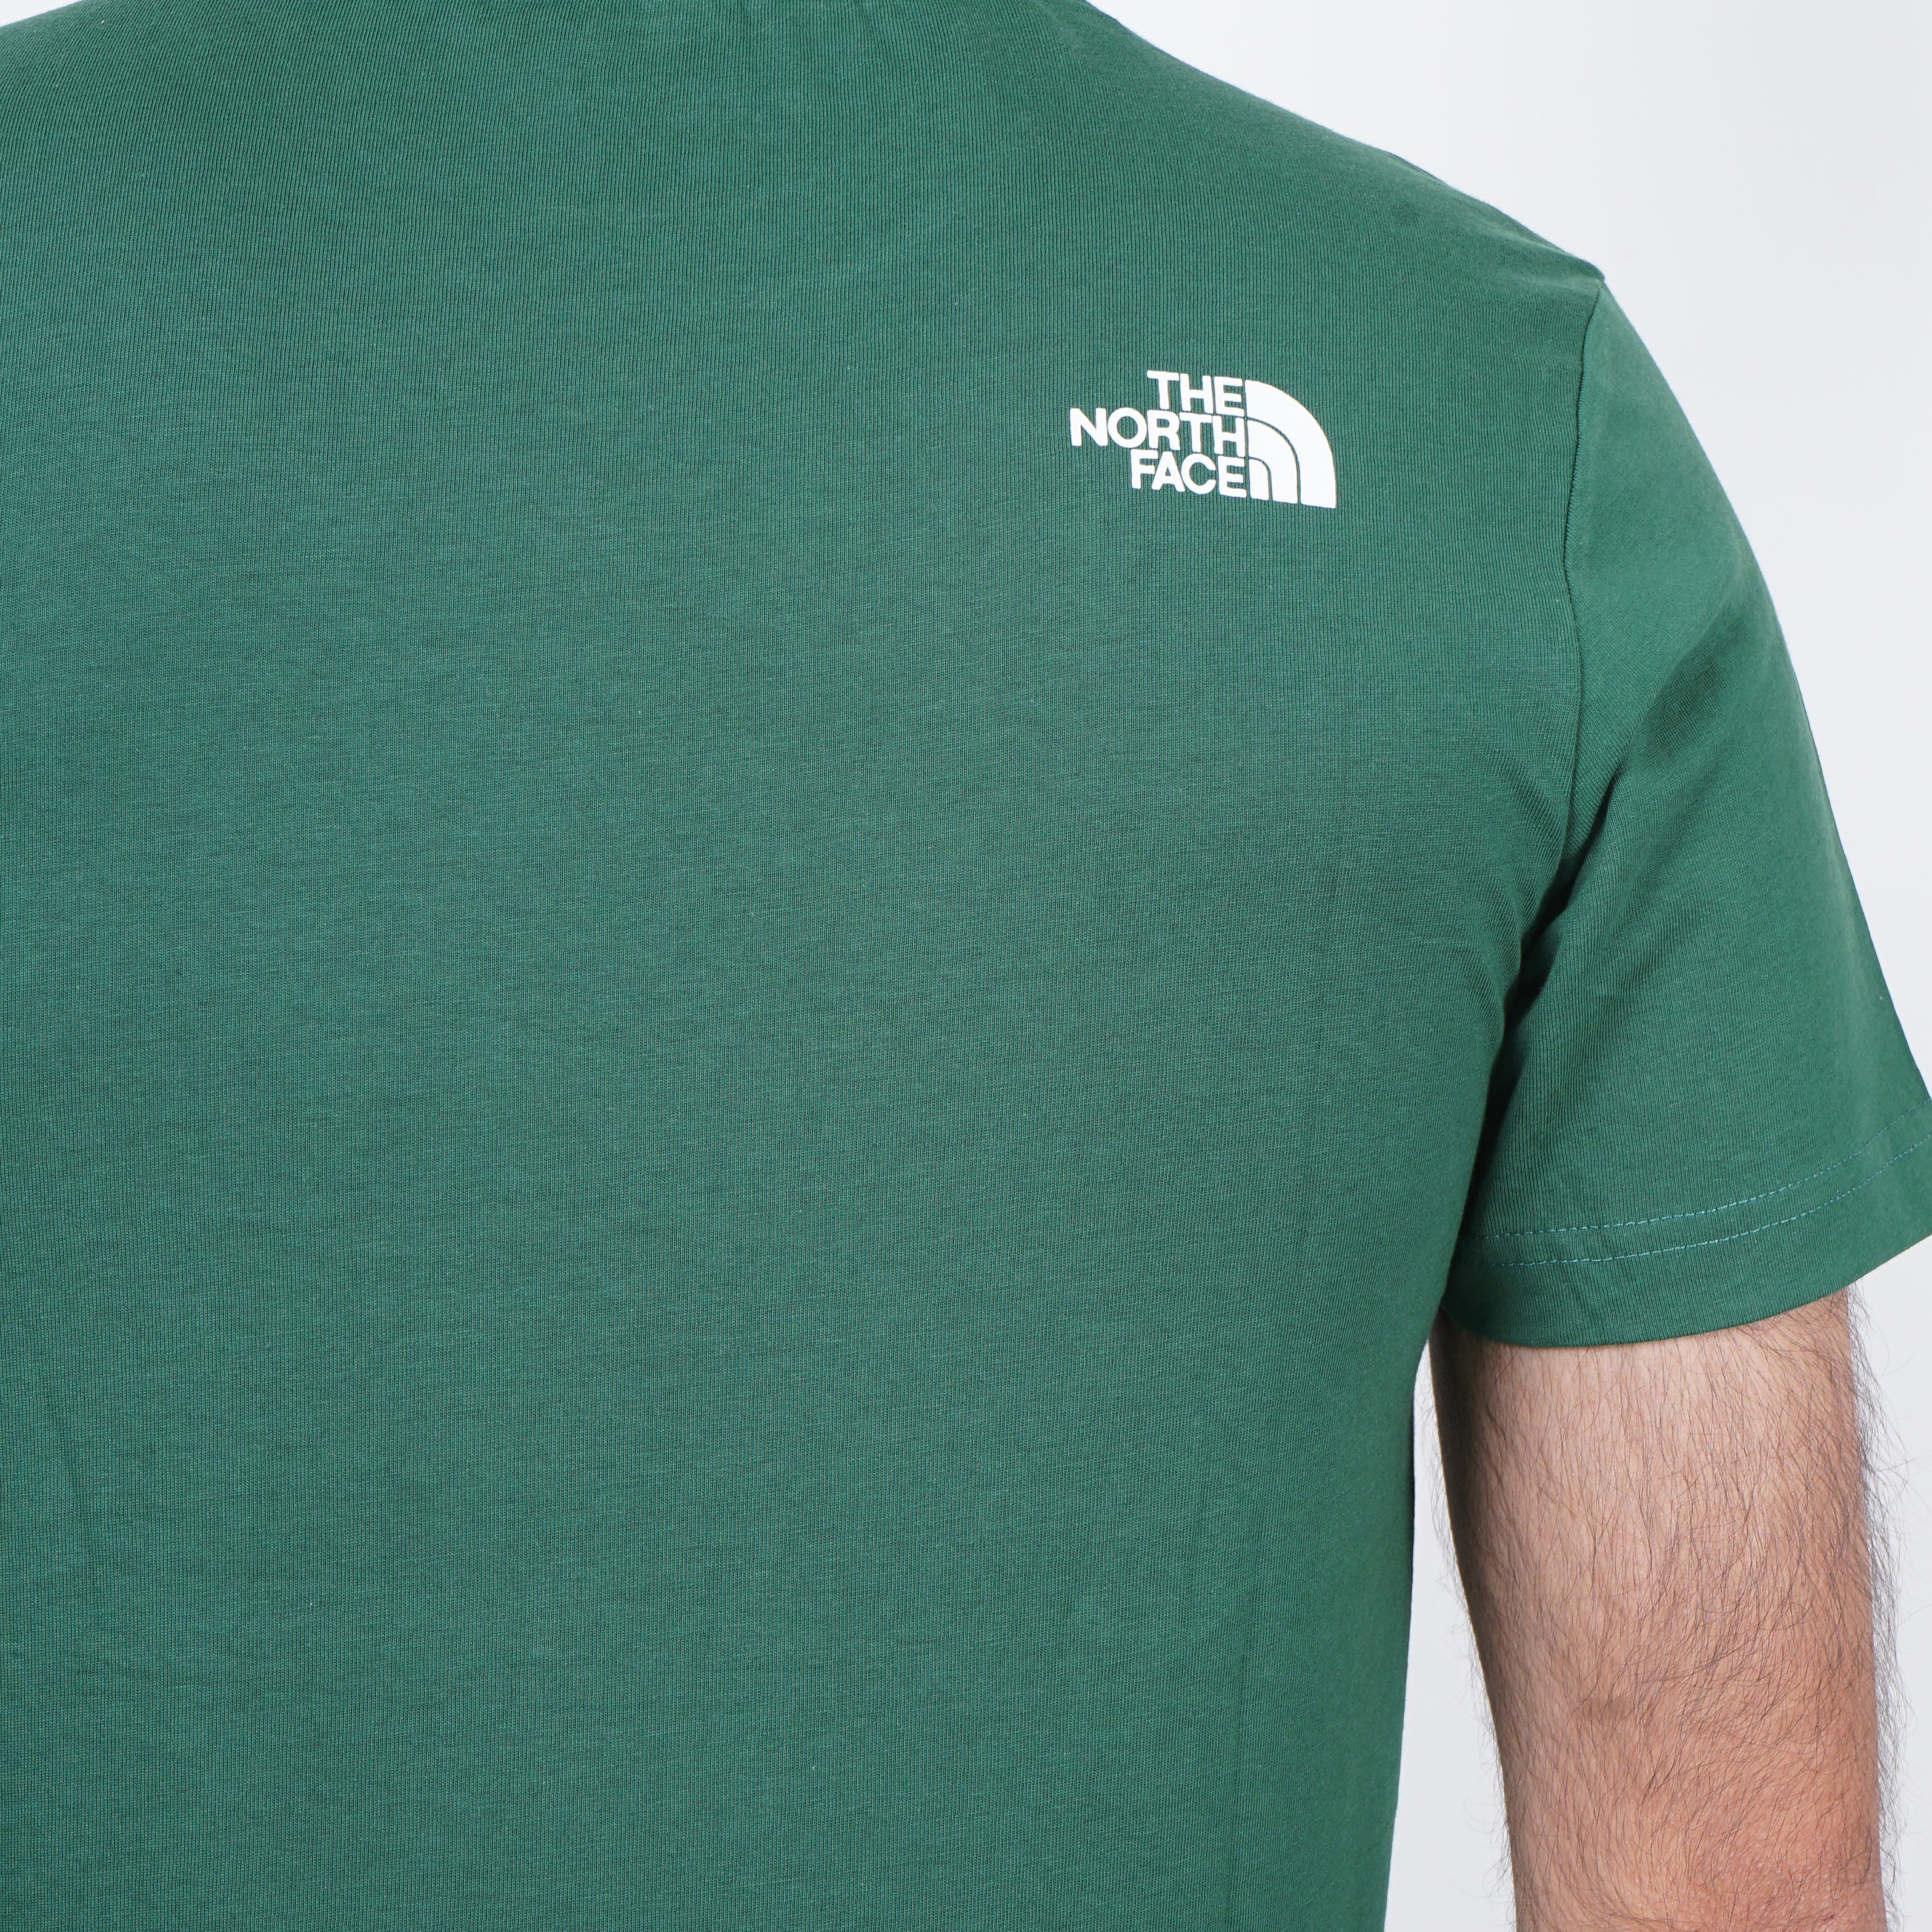 Green t-shirt with a The North face logo on the shoulder against a white background.